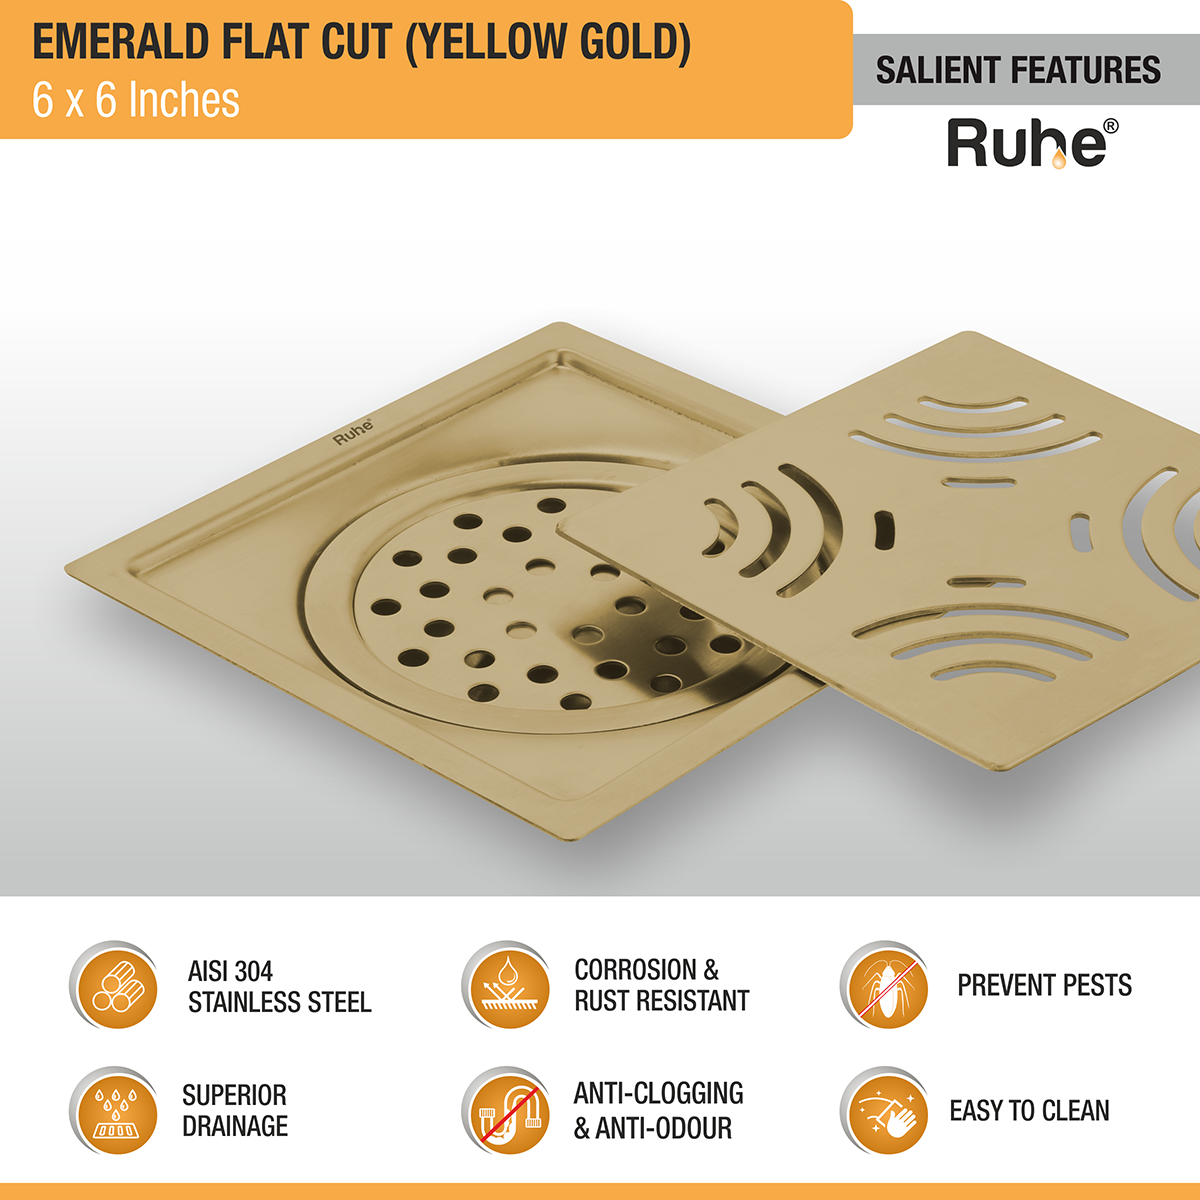 Emerald Square Flat Cut Floor Drain in Yellow Gold PVD Coating (6 x 6 Inches) features